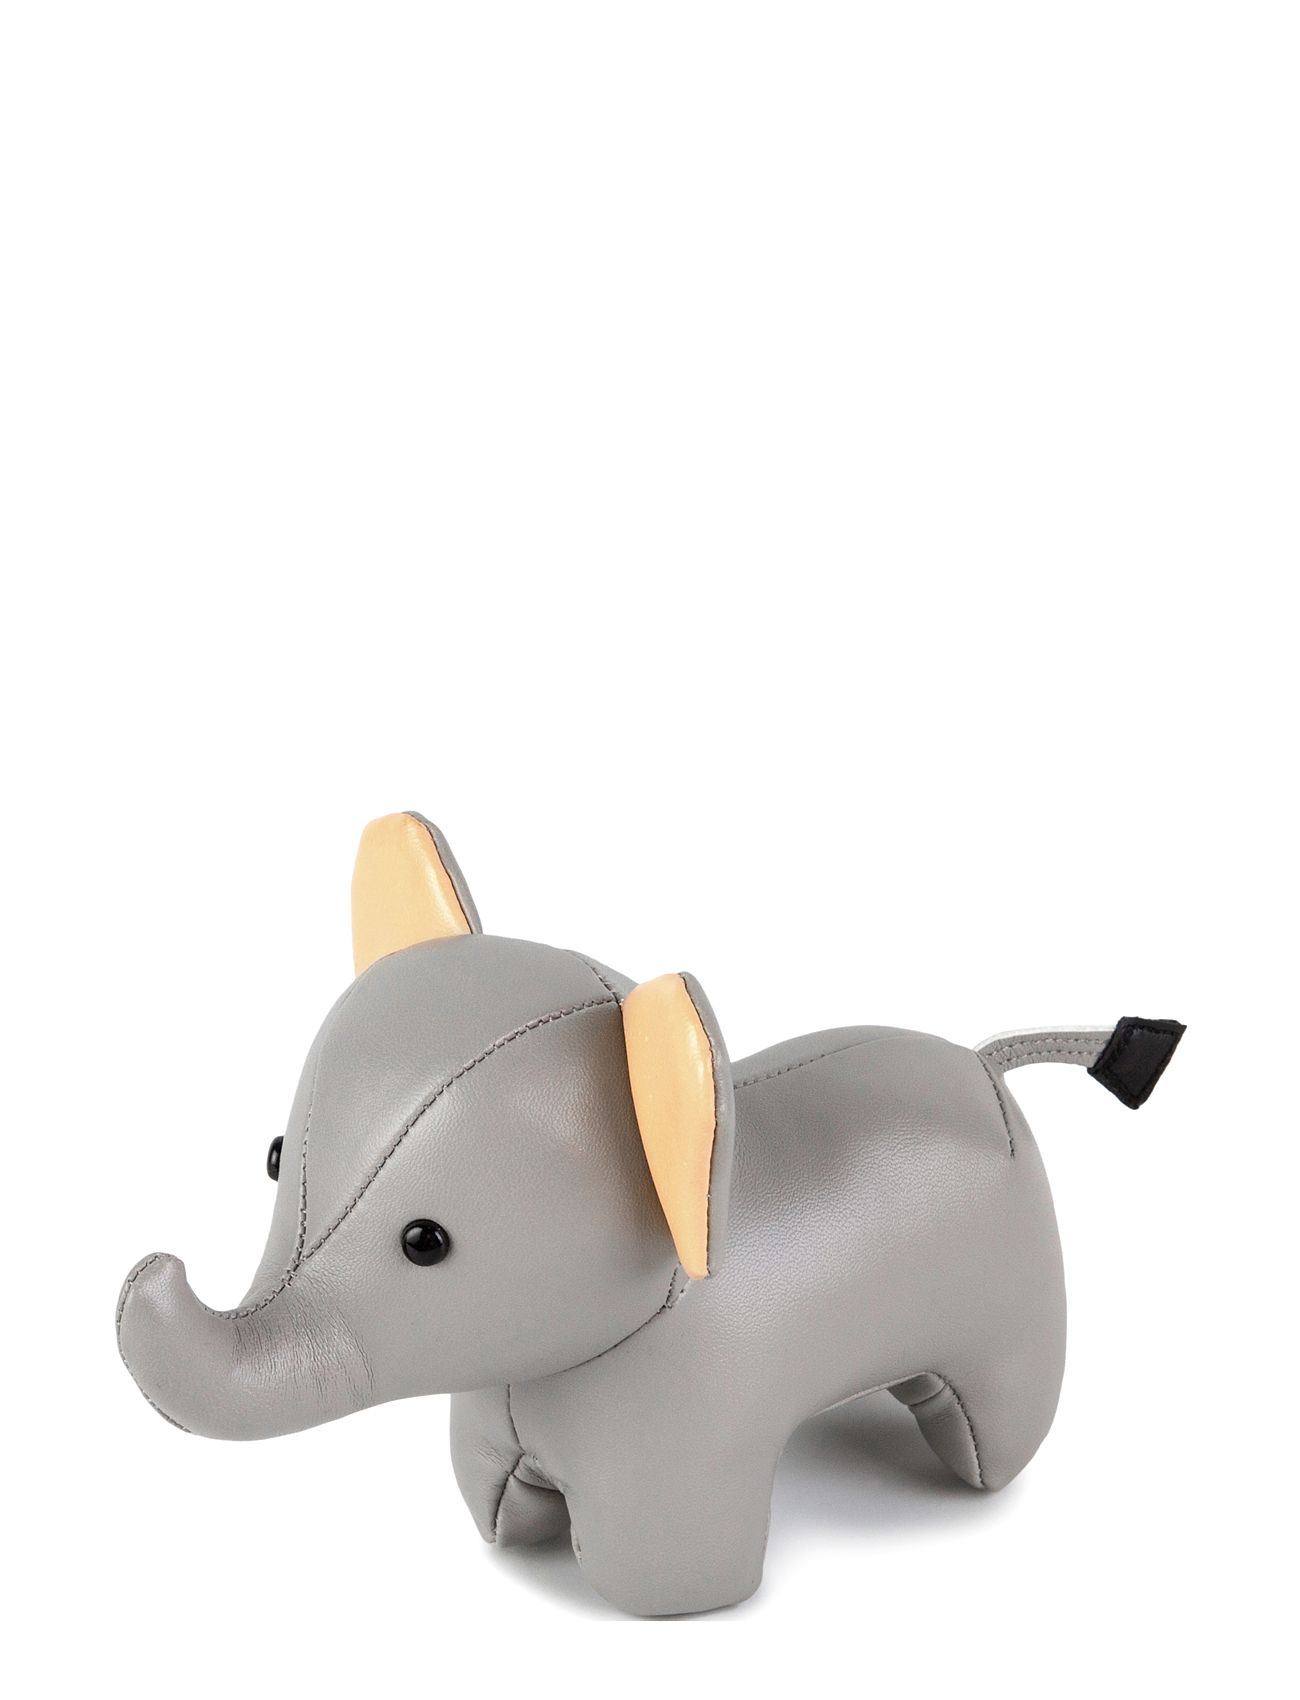 Tiny Friends - Vincent The Elephant Toys Soft Toys Stuffed Animals Grey Little Big Friends